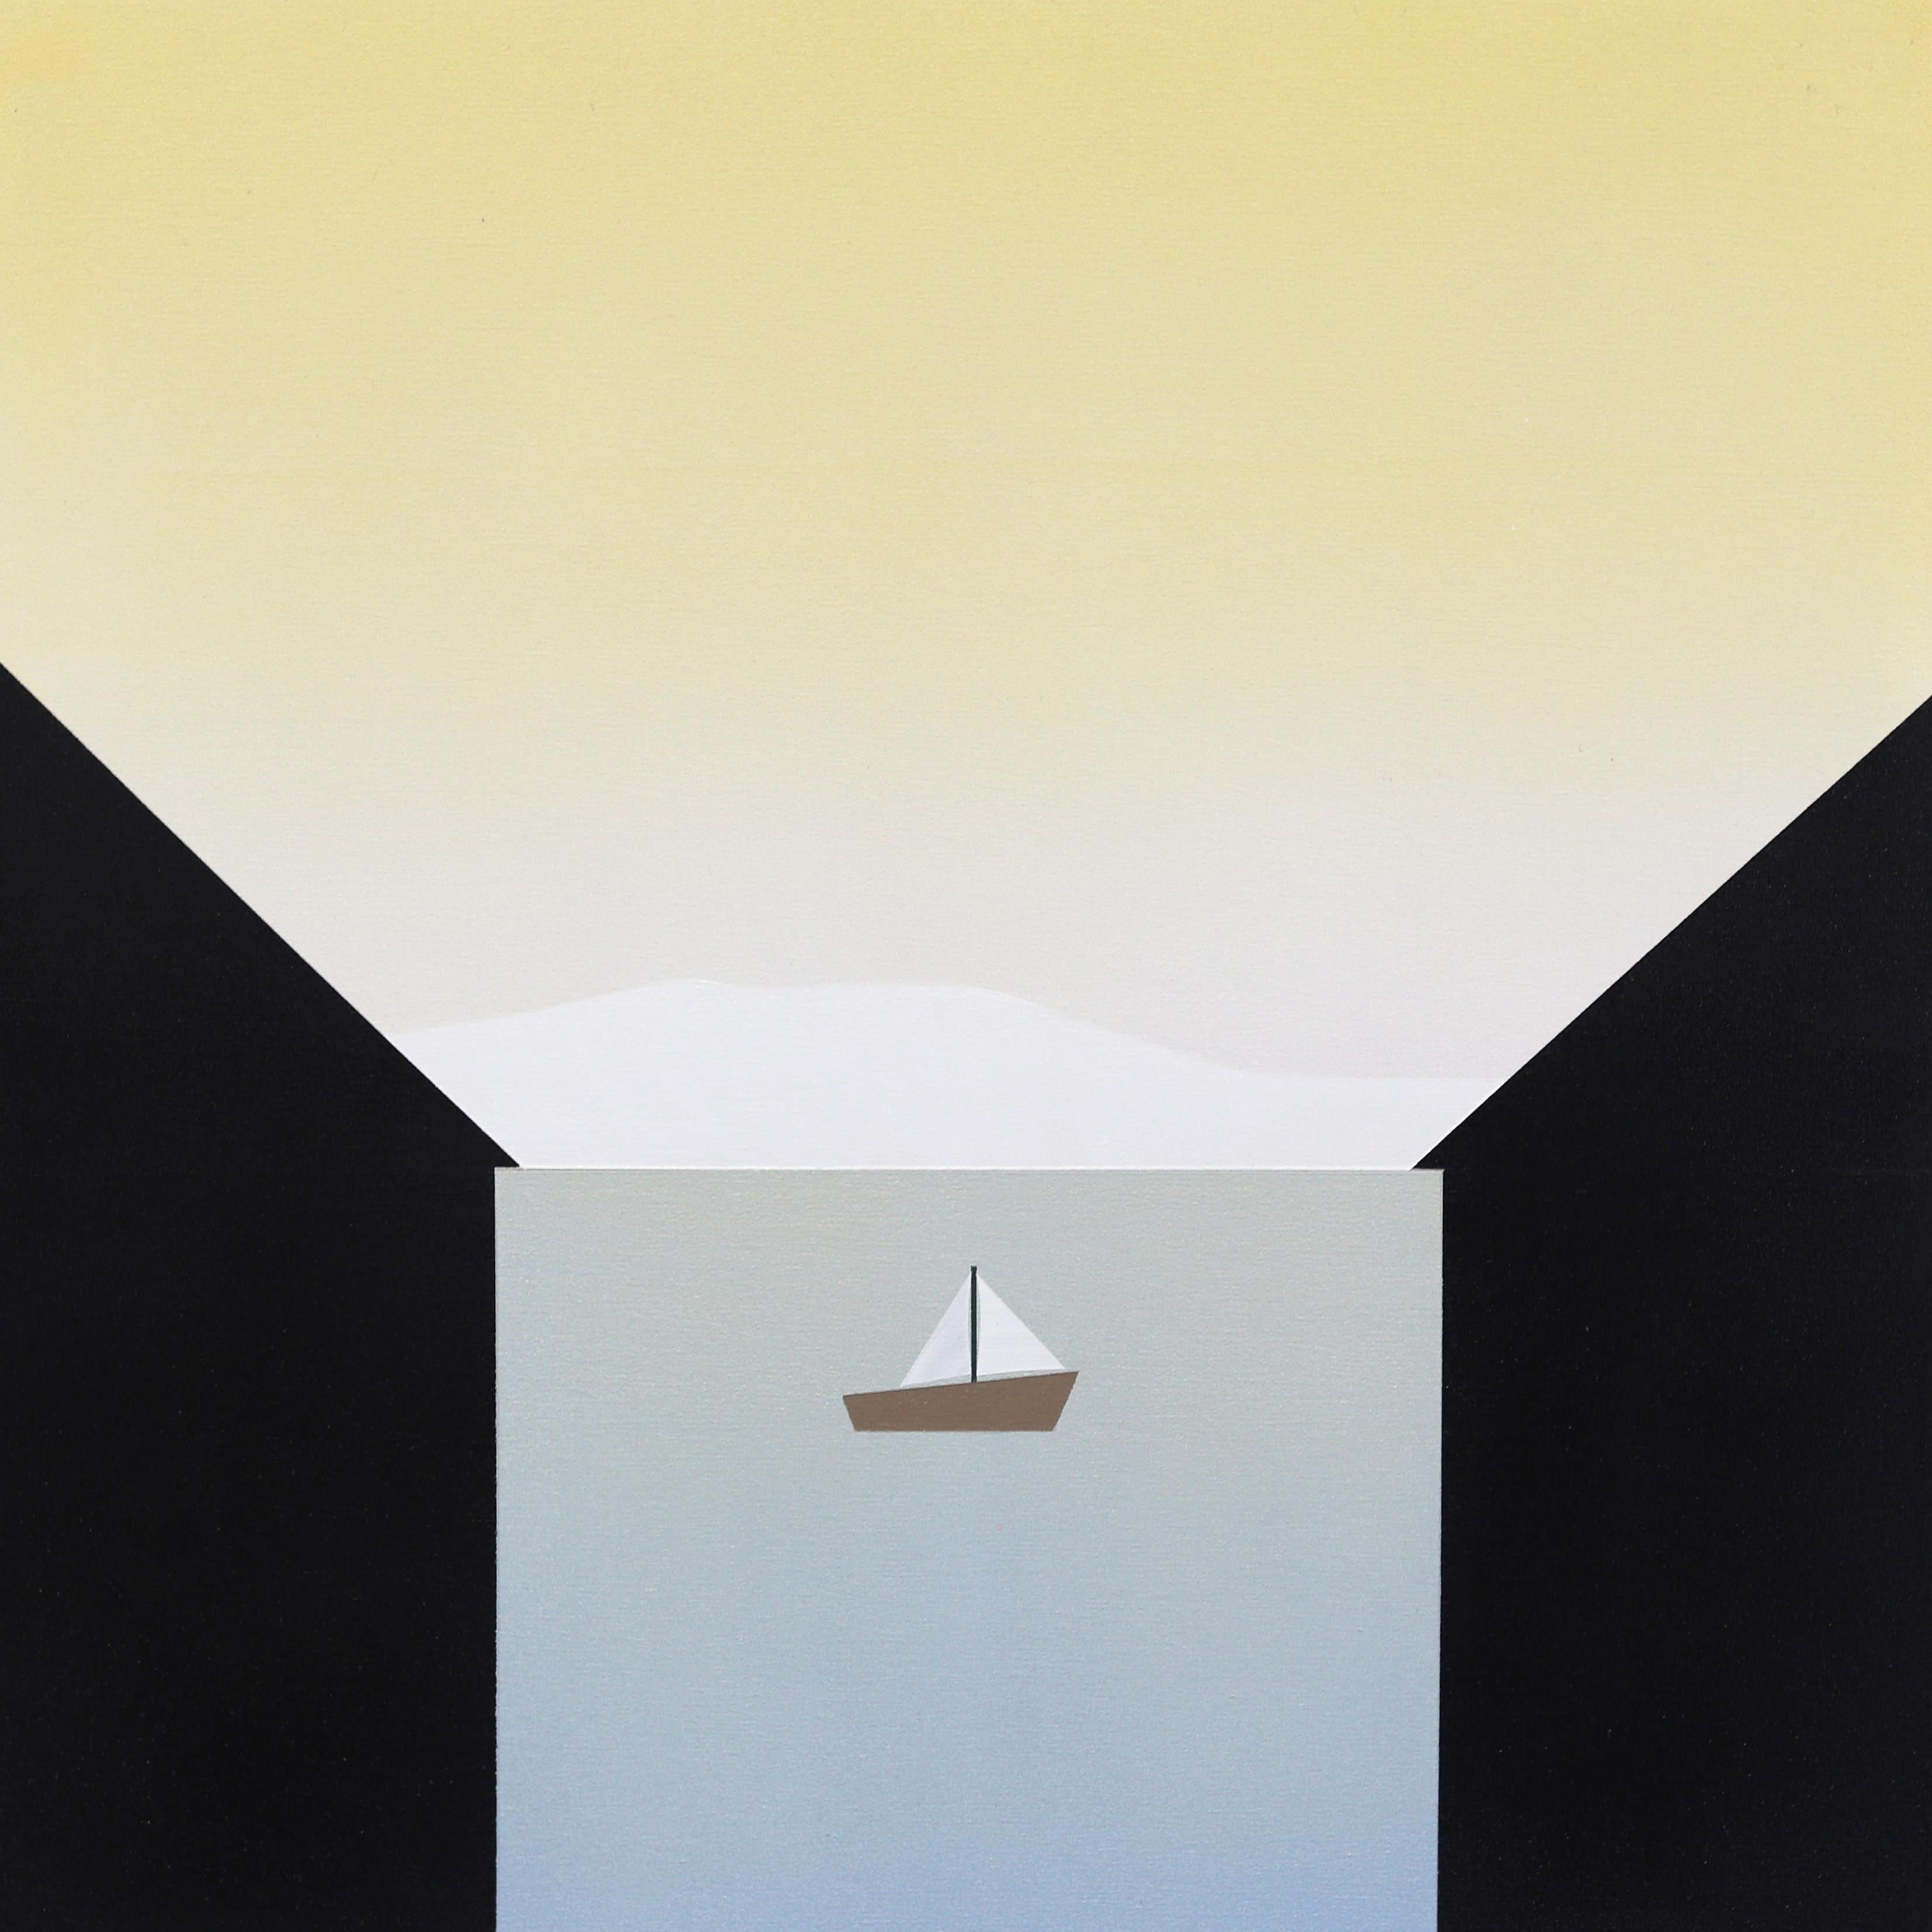 Between - Minimalist Scenic Landscape Painting Boat on Water